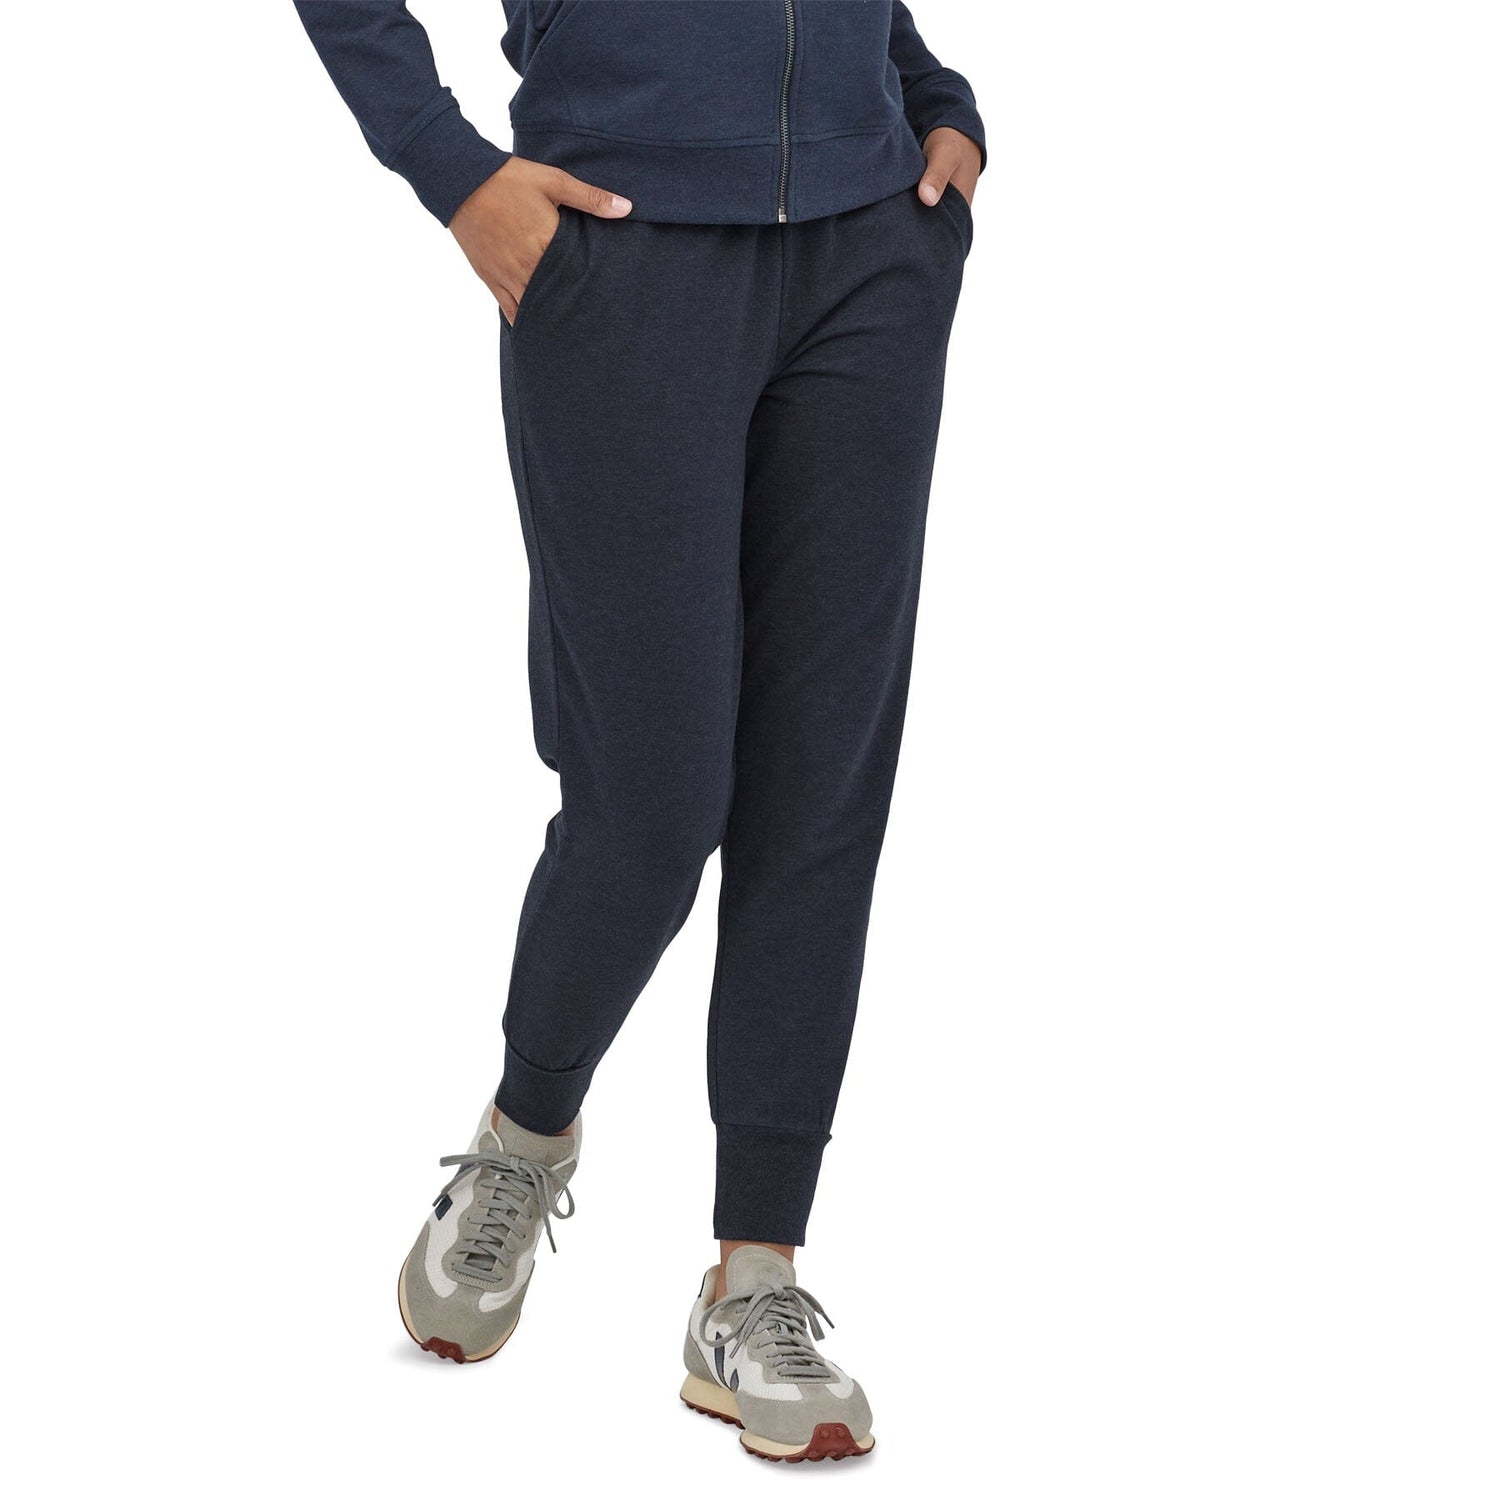 Patagonia W's Ahnya Pants - Organic Cotton & Recycled Polyester Smolder Blue Pants